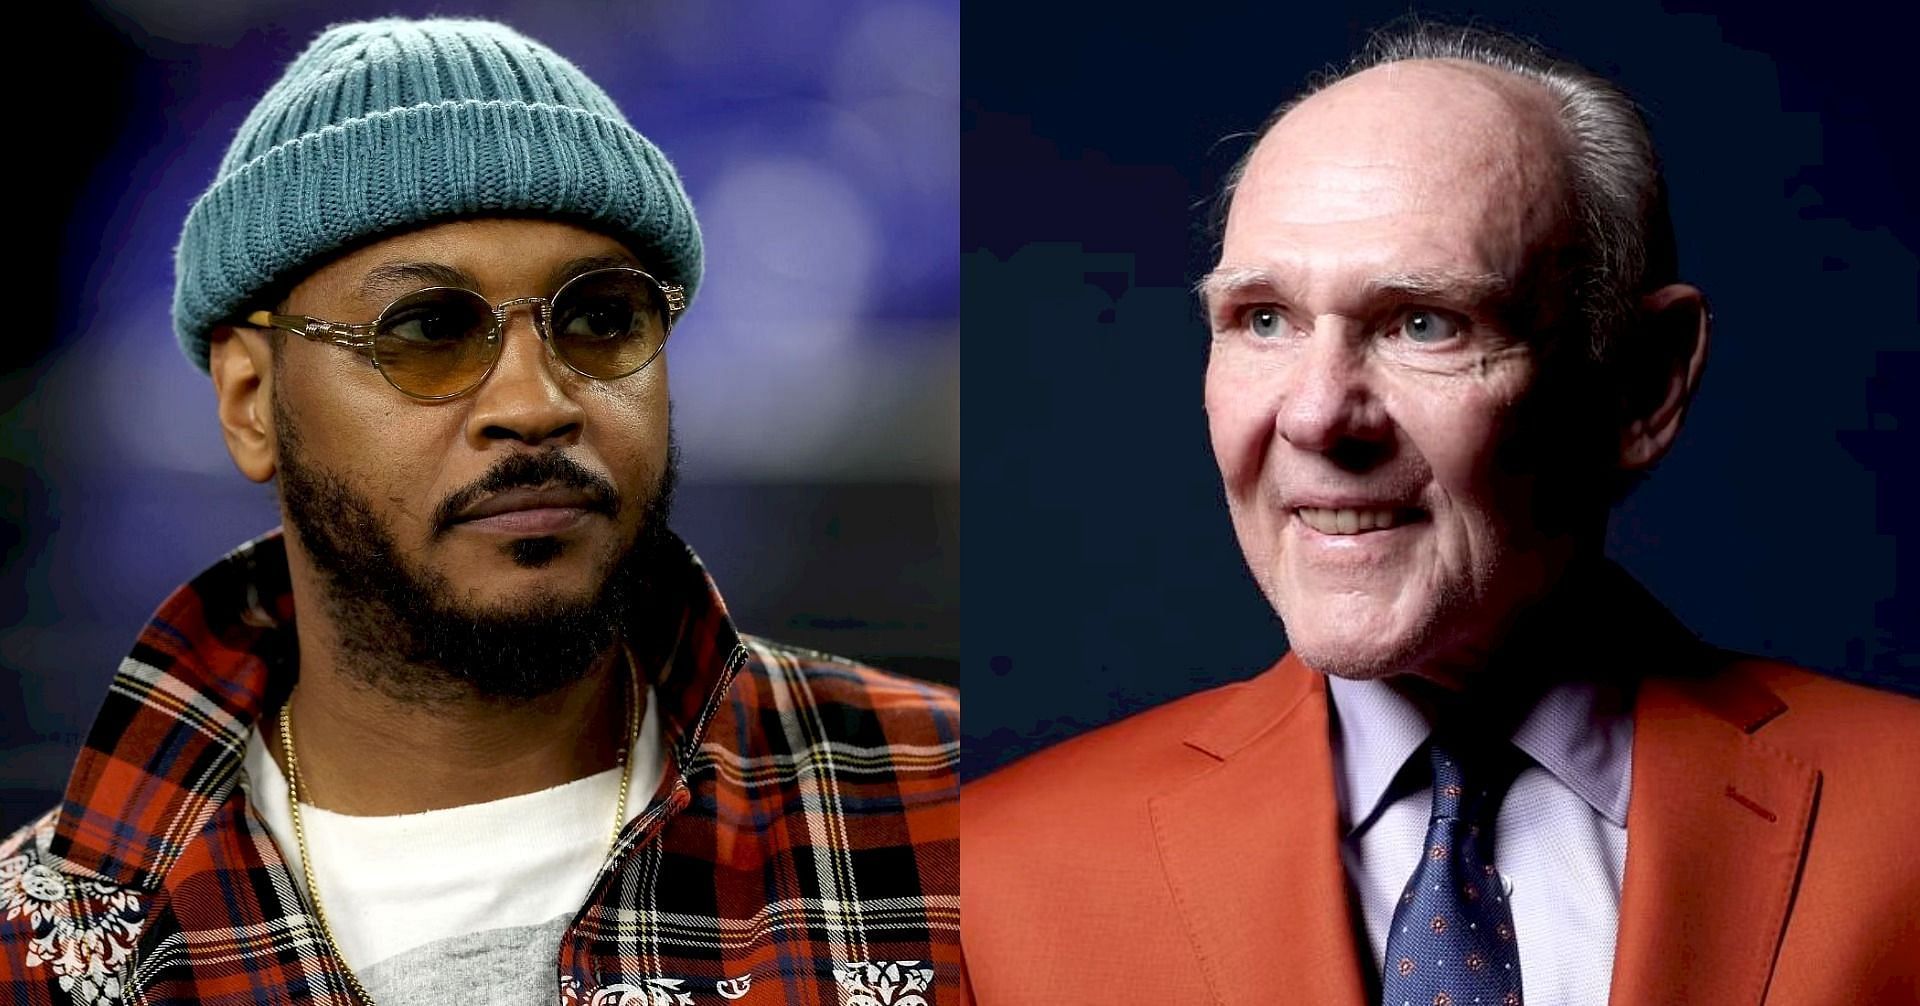 George Karl confirms April Fool&rsquo;s Day prank after saying he hashed things out with Carmelo Anthony 